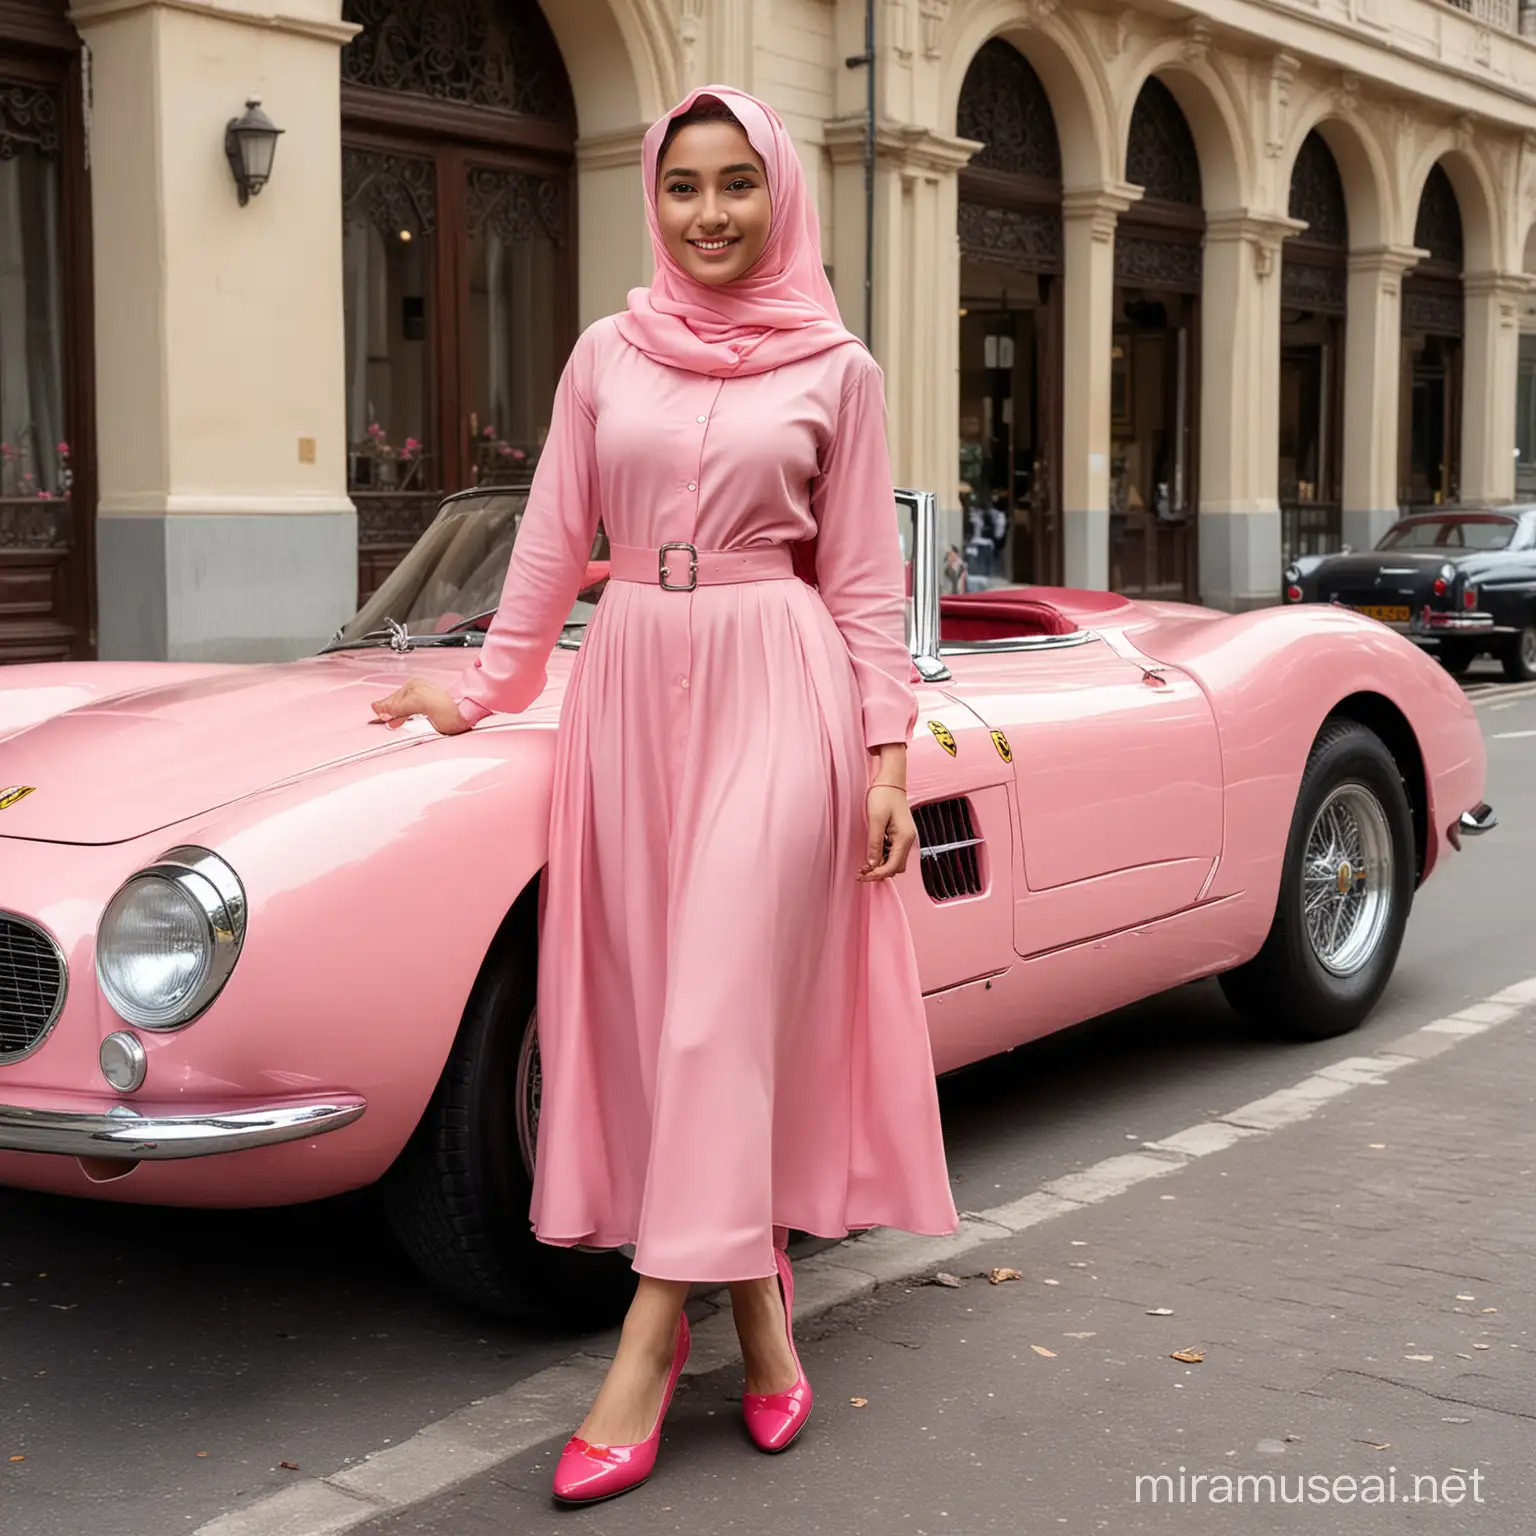 an Indonesian girl next to the door of a fashionable 1957 Ferrari 250 Testa Rossa, wide smiling face, wearing a hijab, abaya dress, long loose skirt pink shoes, oren chameleon car model adds a dominant cool mystery with a very fashionable metal texture, background city ​​park street, during the day, ultra high quality